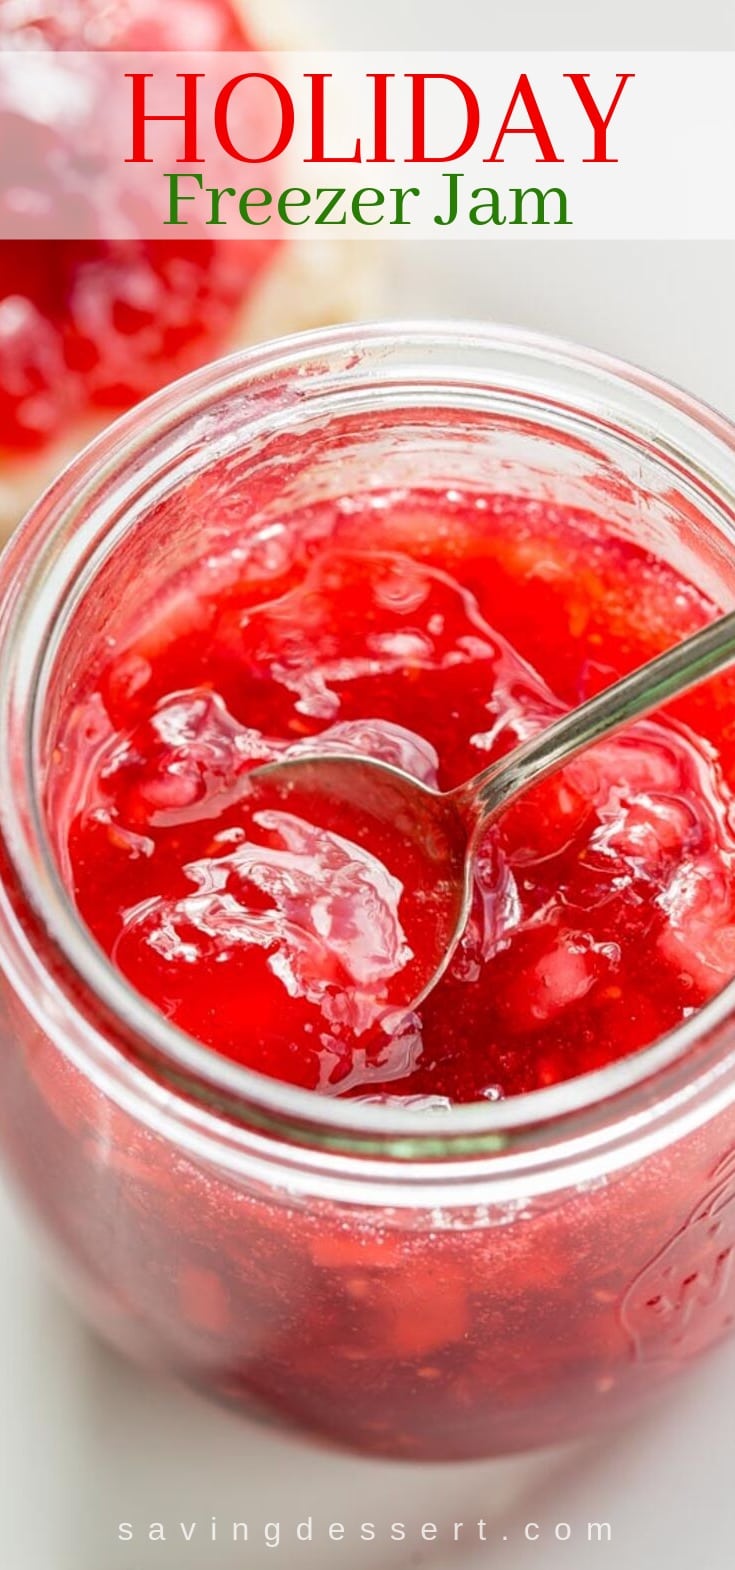 An open jar of bright pink Holiday Freezer Jam with a spoon